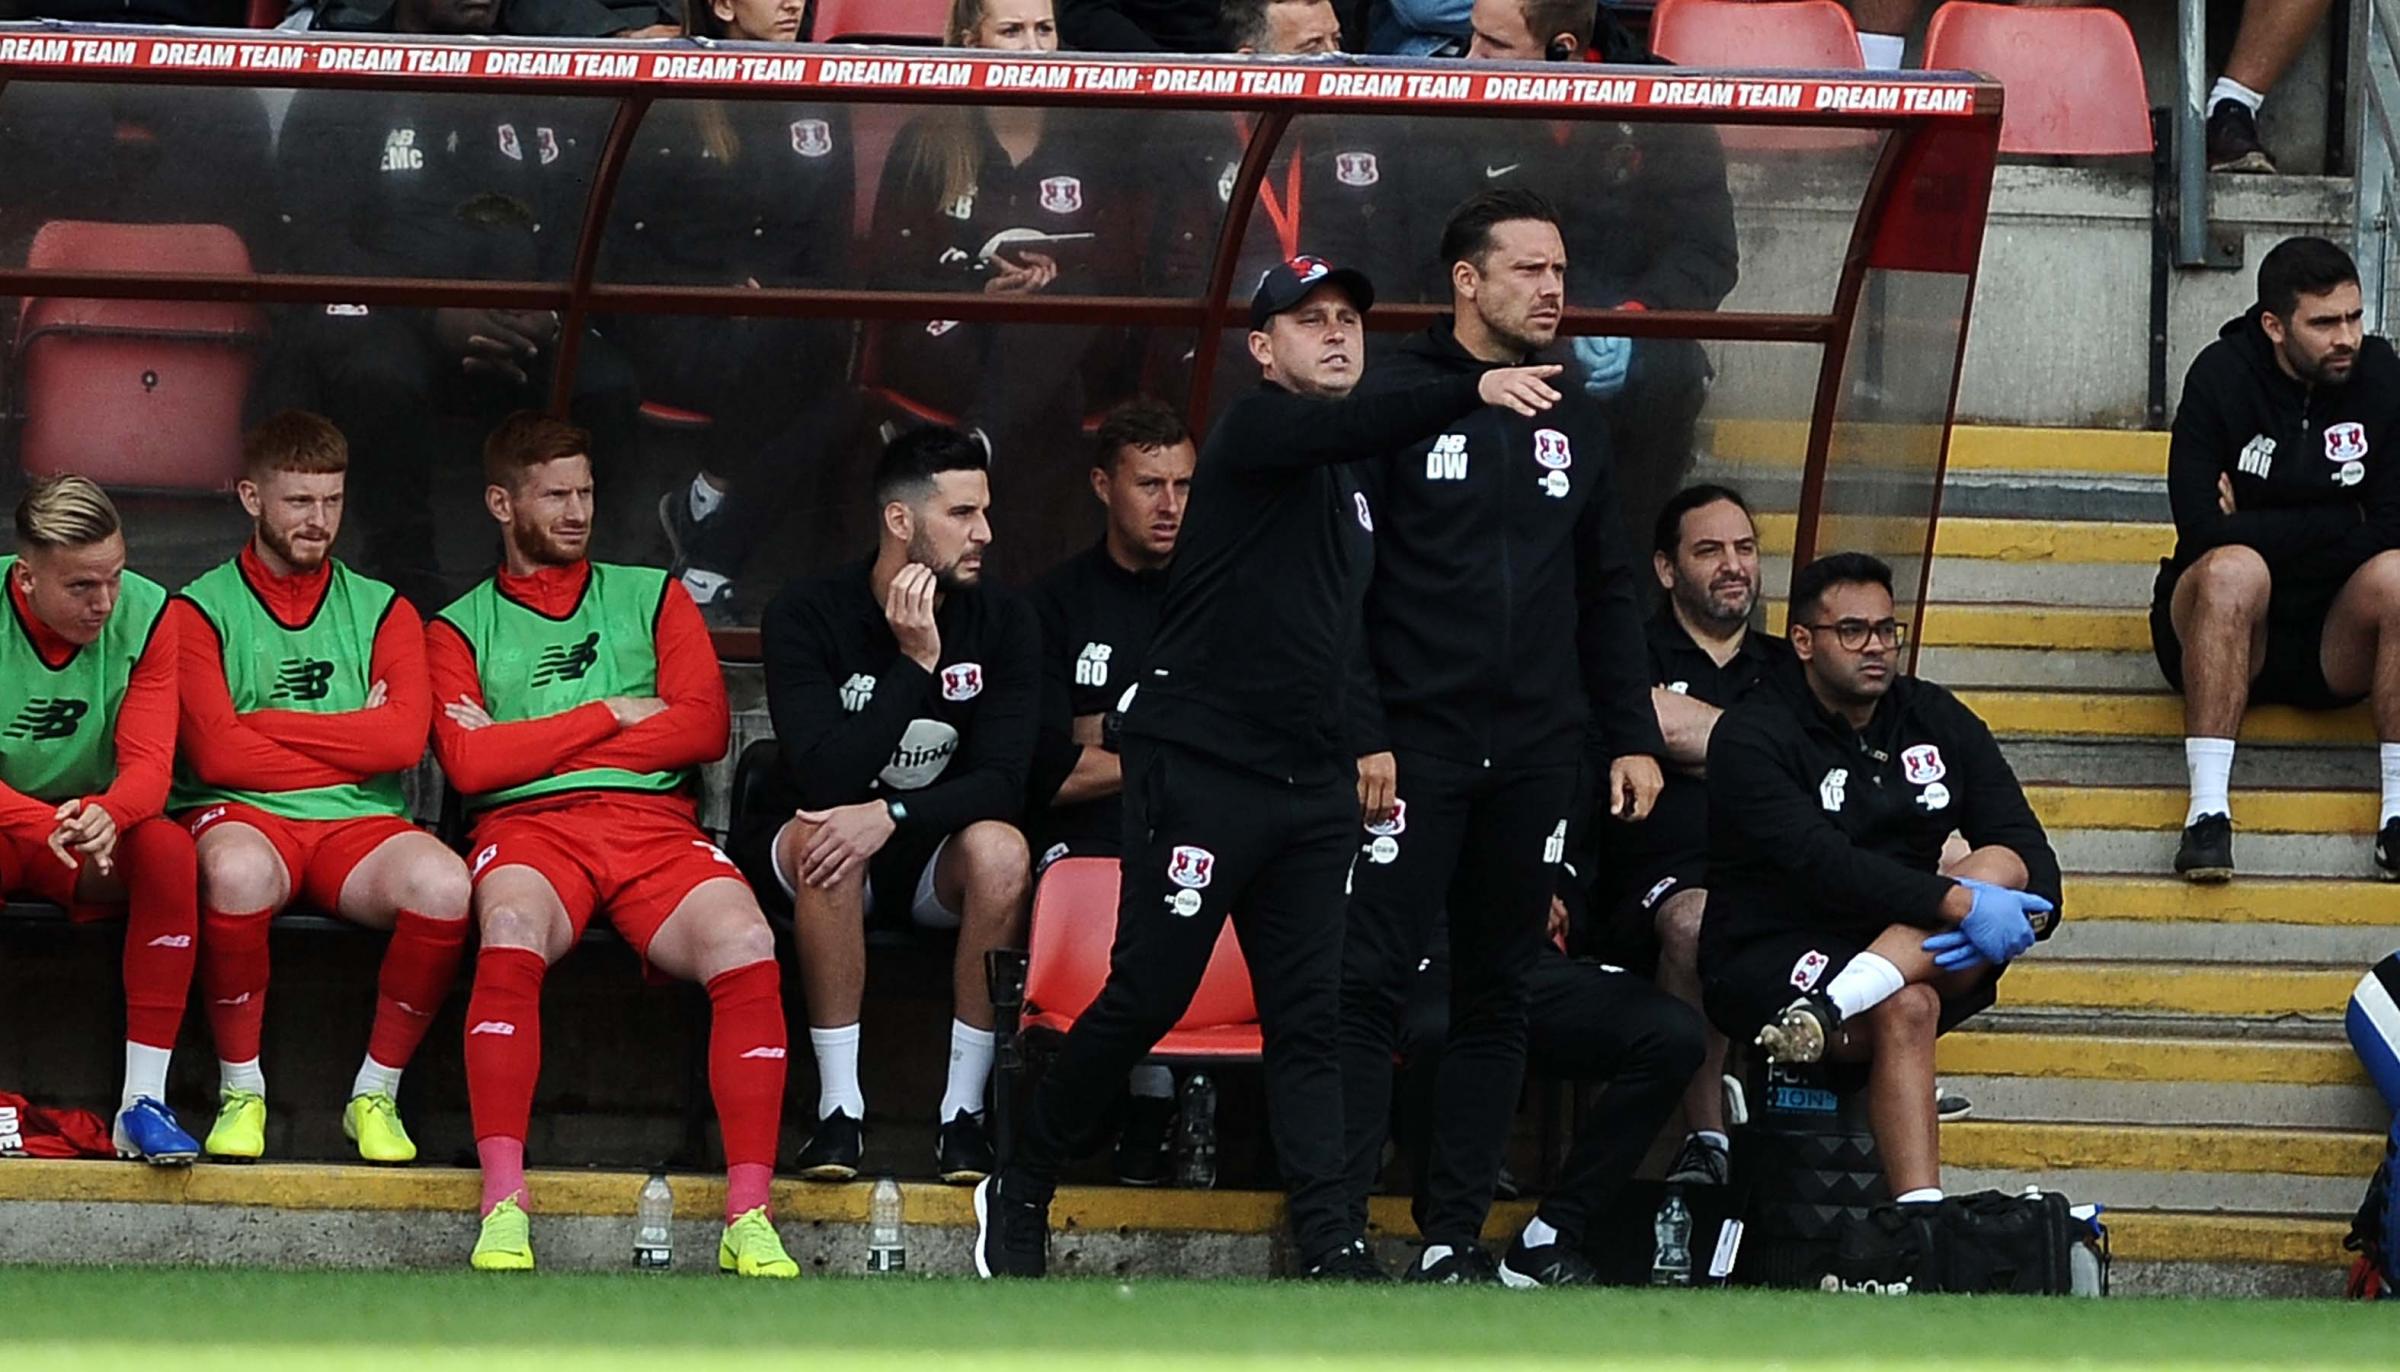 Leyton Orient manager Ross Embleton reacts to Saturday's 3-1 defeat against Swindon Town in League Two